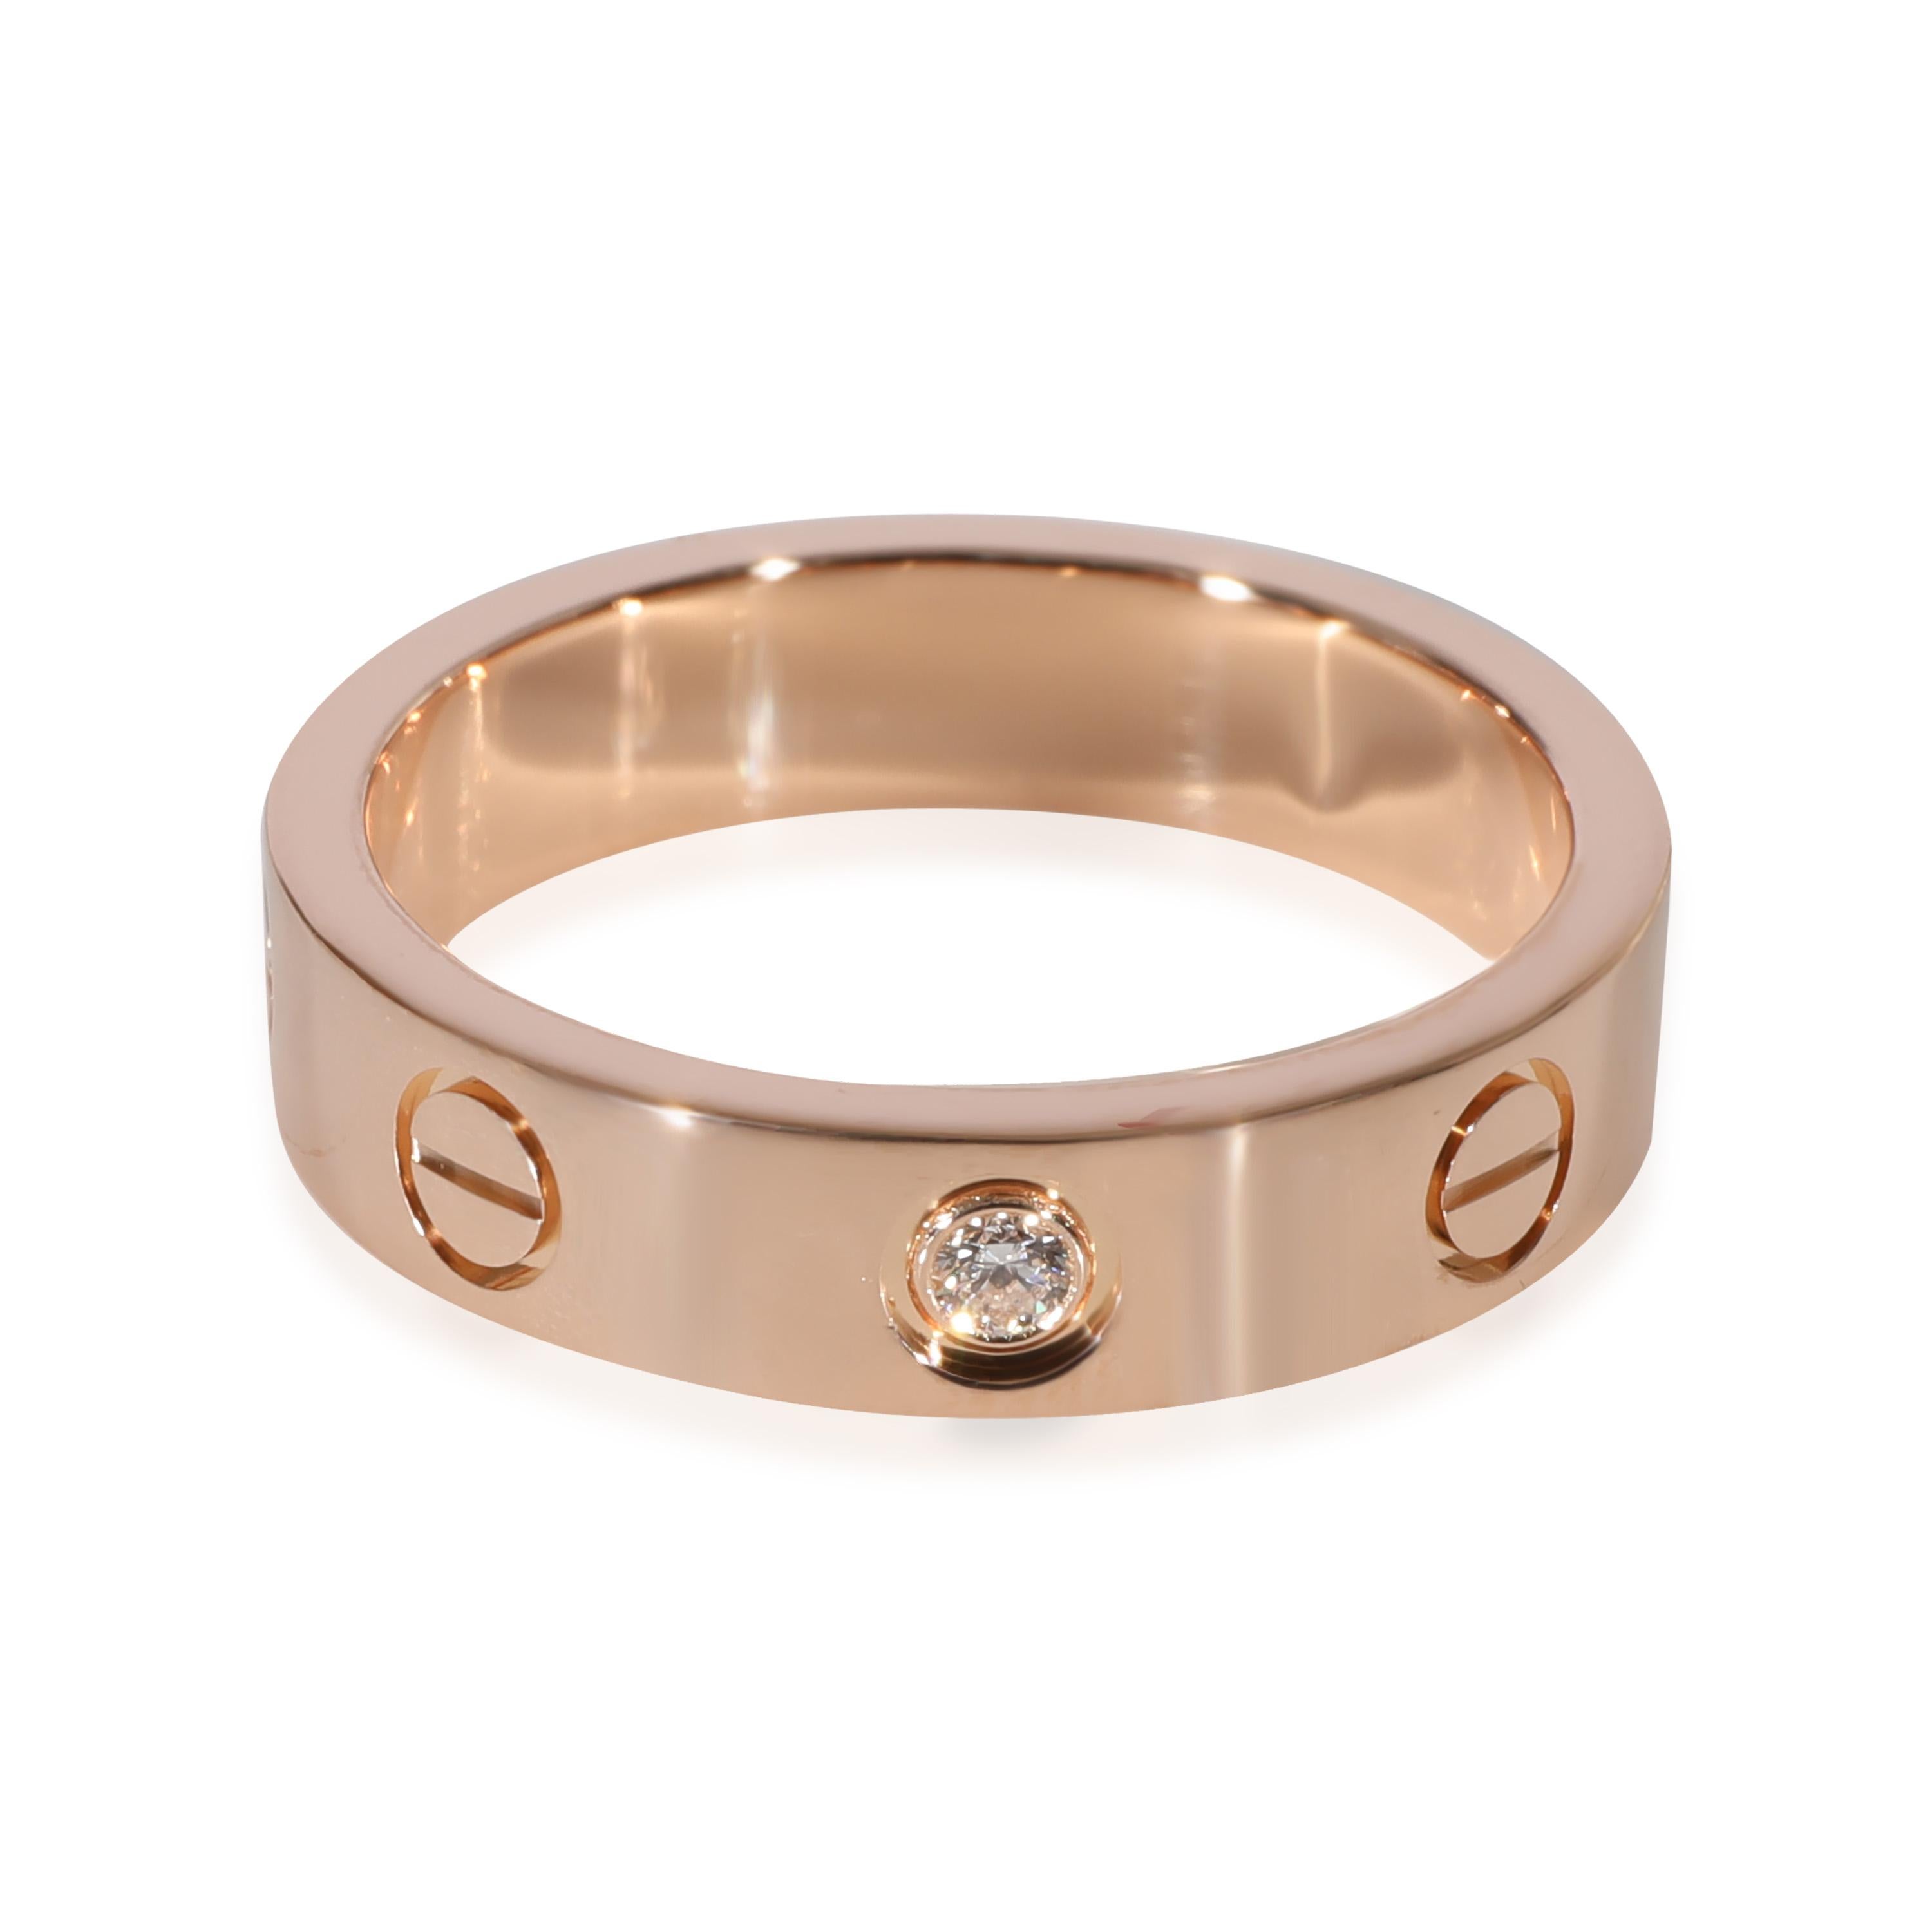 Cartier Love Diamond Wedding Band in 18k Rose Gold 0.02 CTW In Excellent Condition For Sale In New York, NY